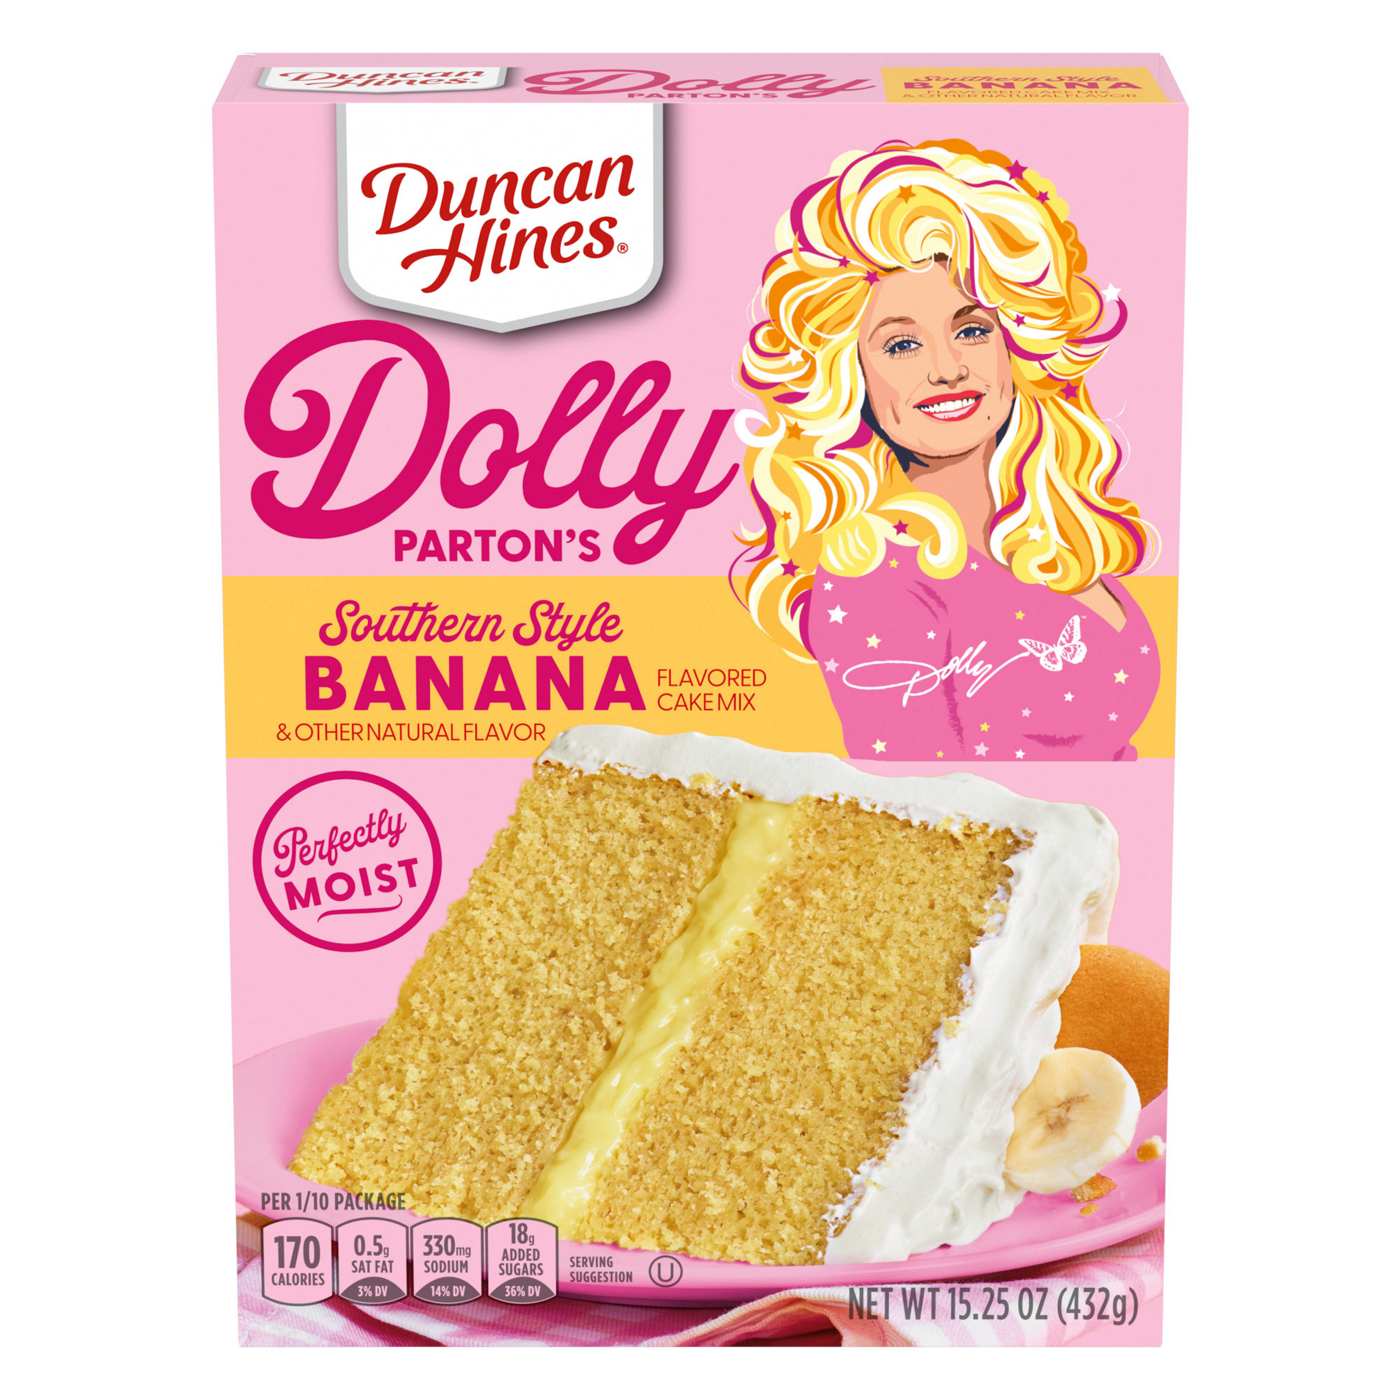 Duncan Hines Dolly Parton's Favorite Southern-Style Banana Flavored Cake Mix; image 1 of 7